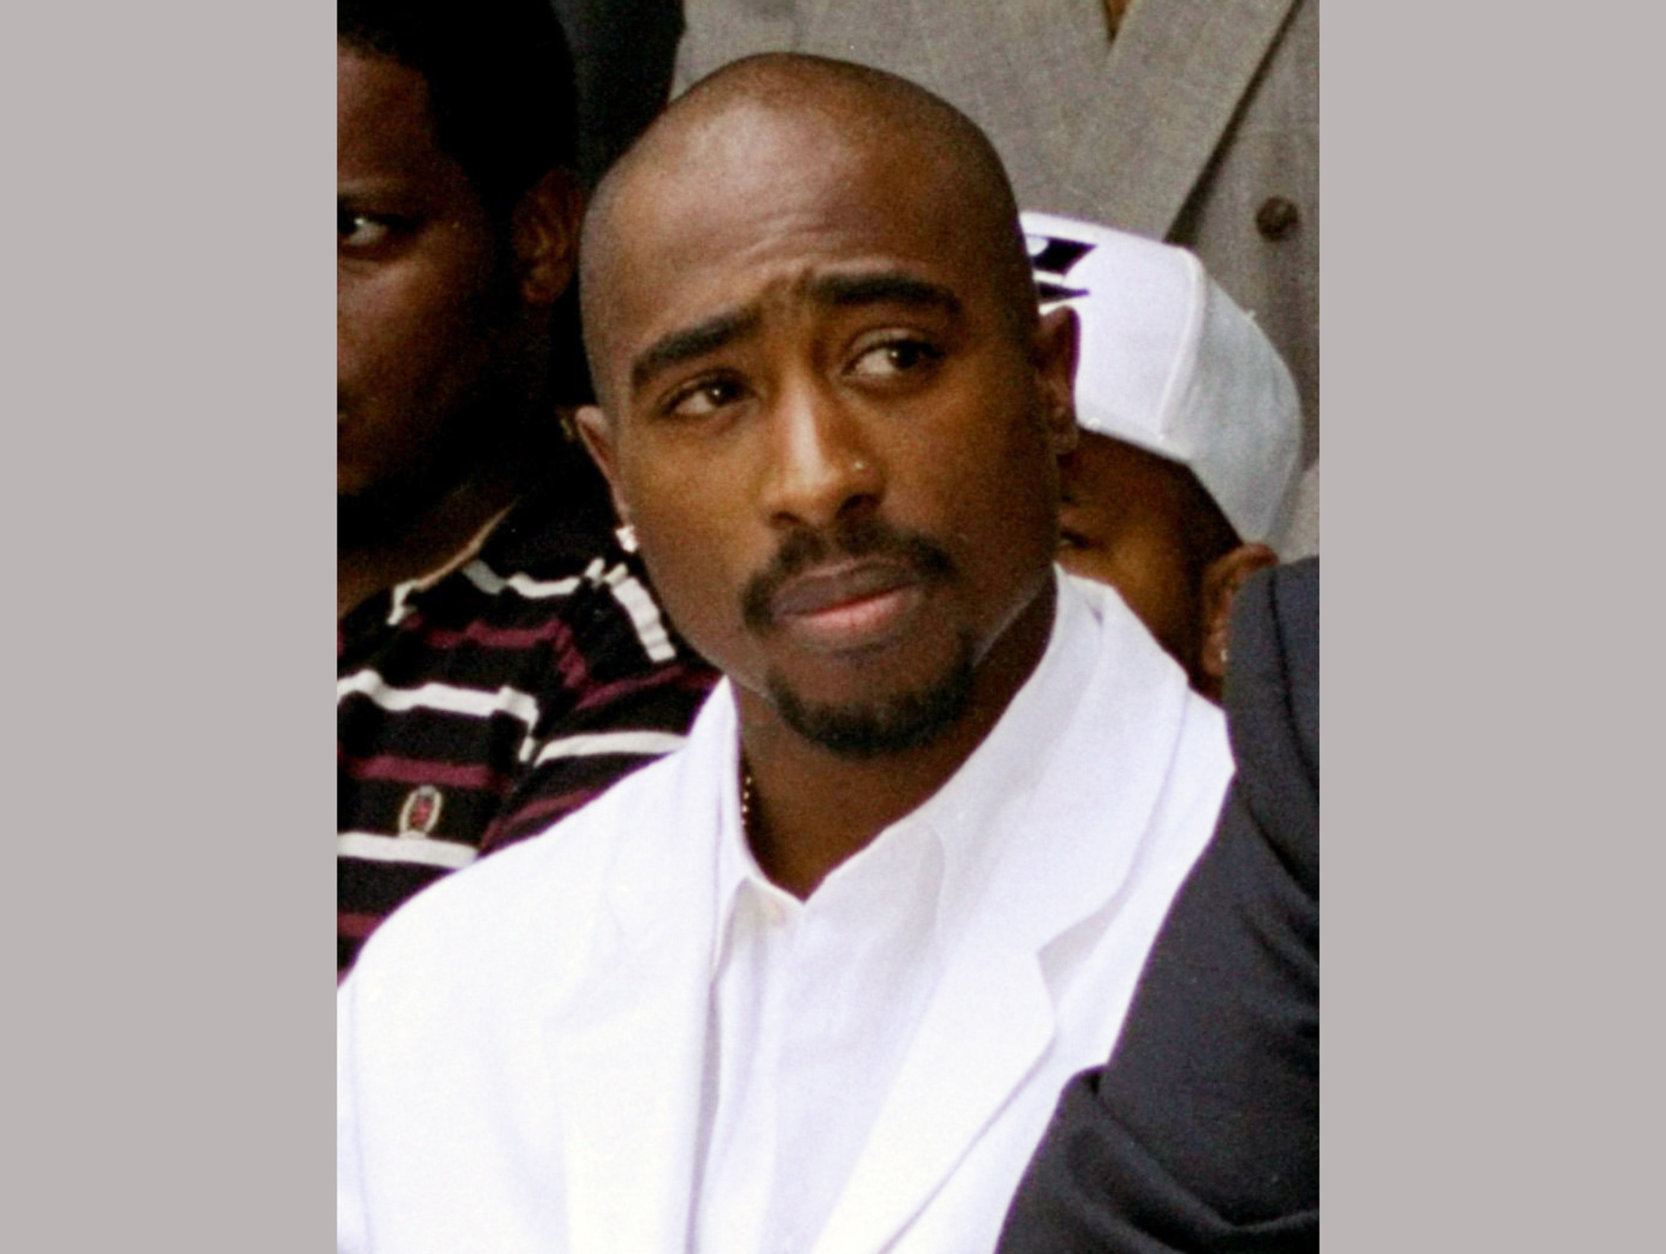 FILE - In this Aug. 15, 1996, file photo, rapper Tupac Shakur attends a voter registration event in South Central Los Angeles. Items owned by Shakur have been donated to Temple University, including a bullet-dented golden medallion the rapper was wearing in 1994 when he was shot five times. Diane Turner, the collection's curator, said Thursday, Nov. 1, 2018, that the Blockson Collection will increase its focus on hip-hop culture with the addition of Shakur's items. (AP Photo/Frank Wiese, File)